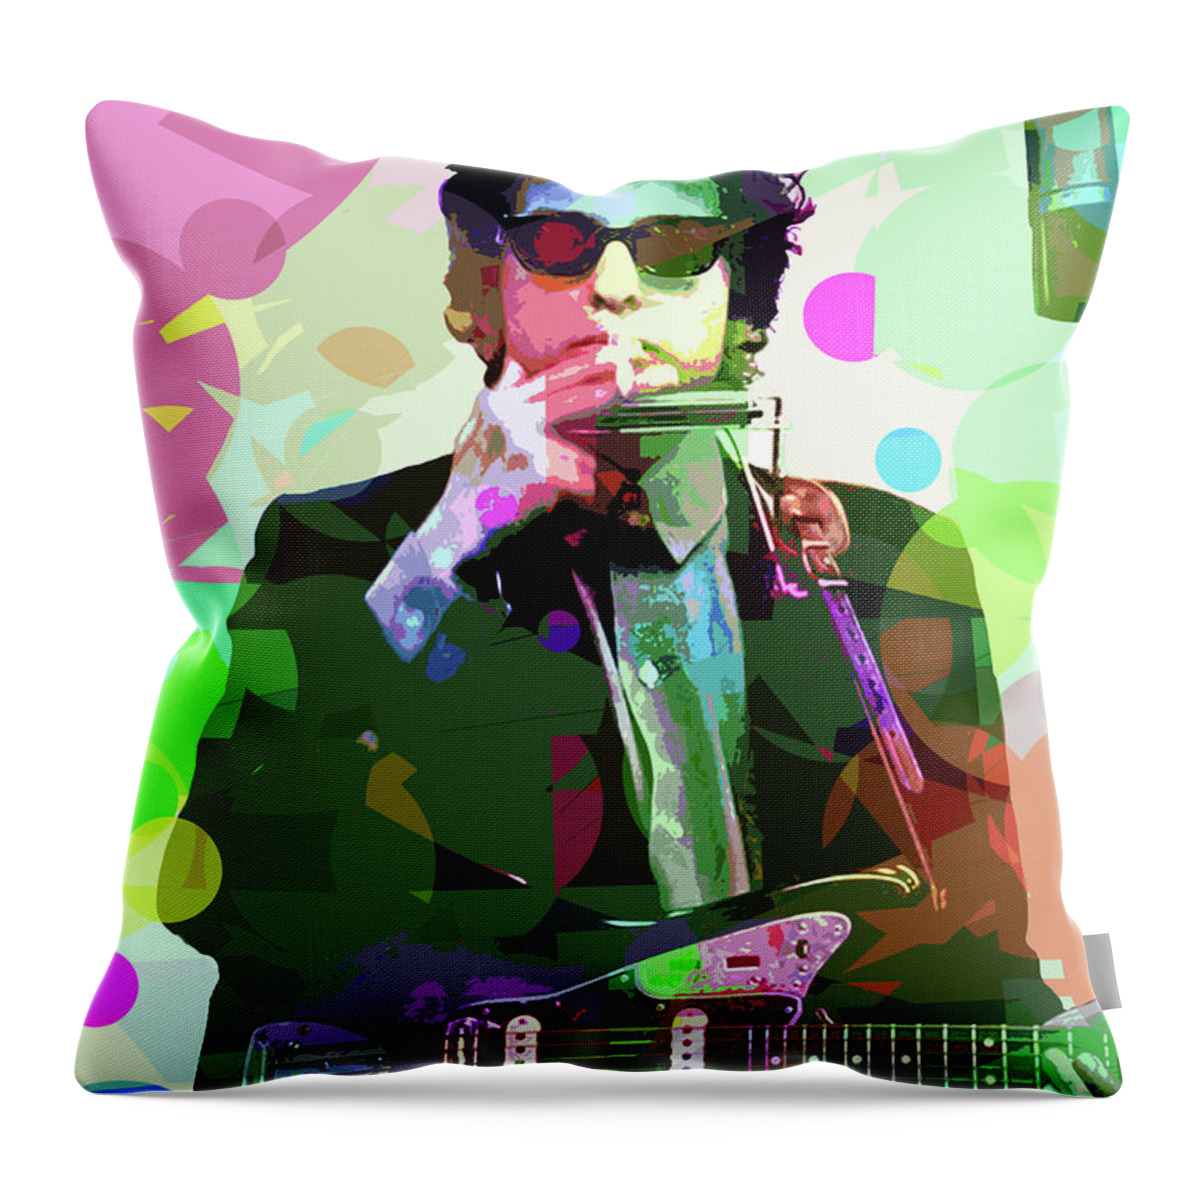 Bob Dylan Throw Pillow featuring the painting Dylan In Studio by David Lloyd Glover